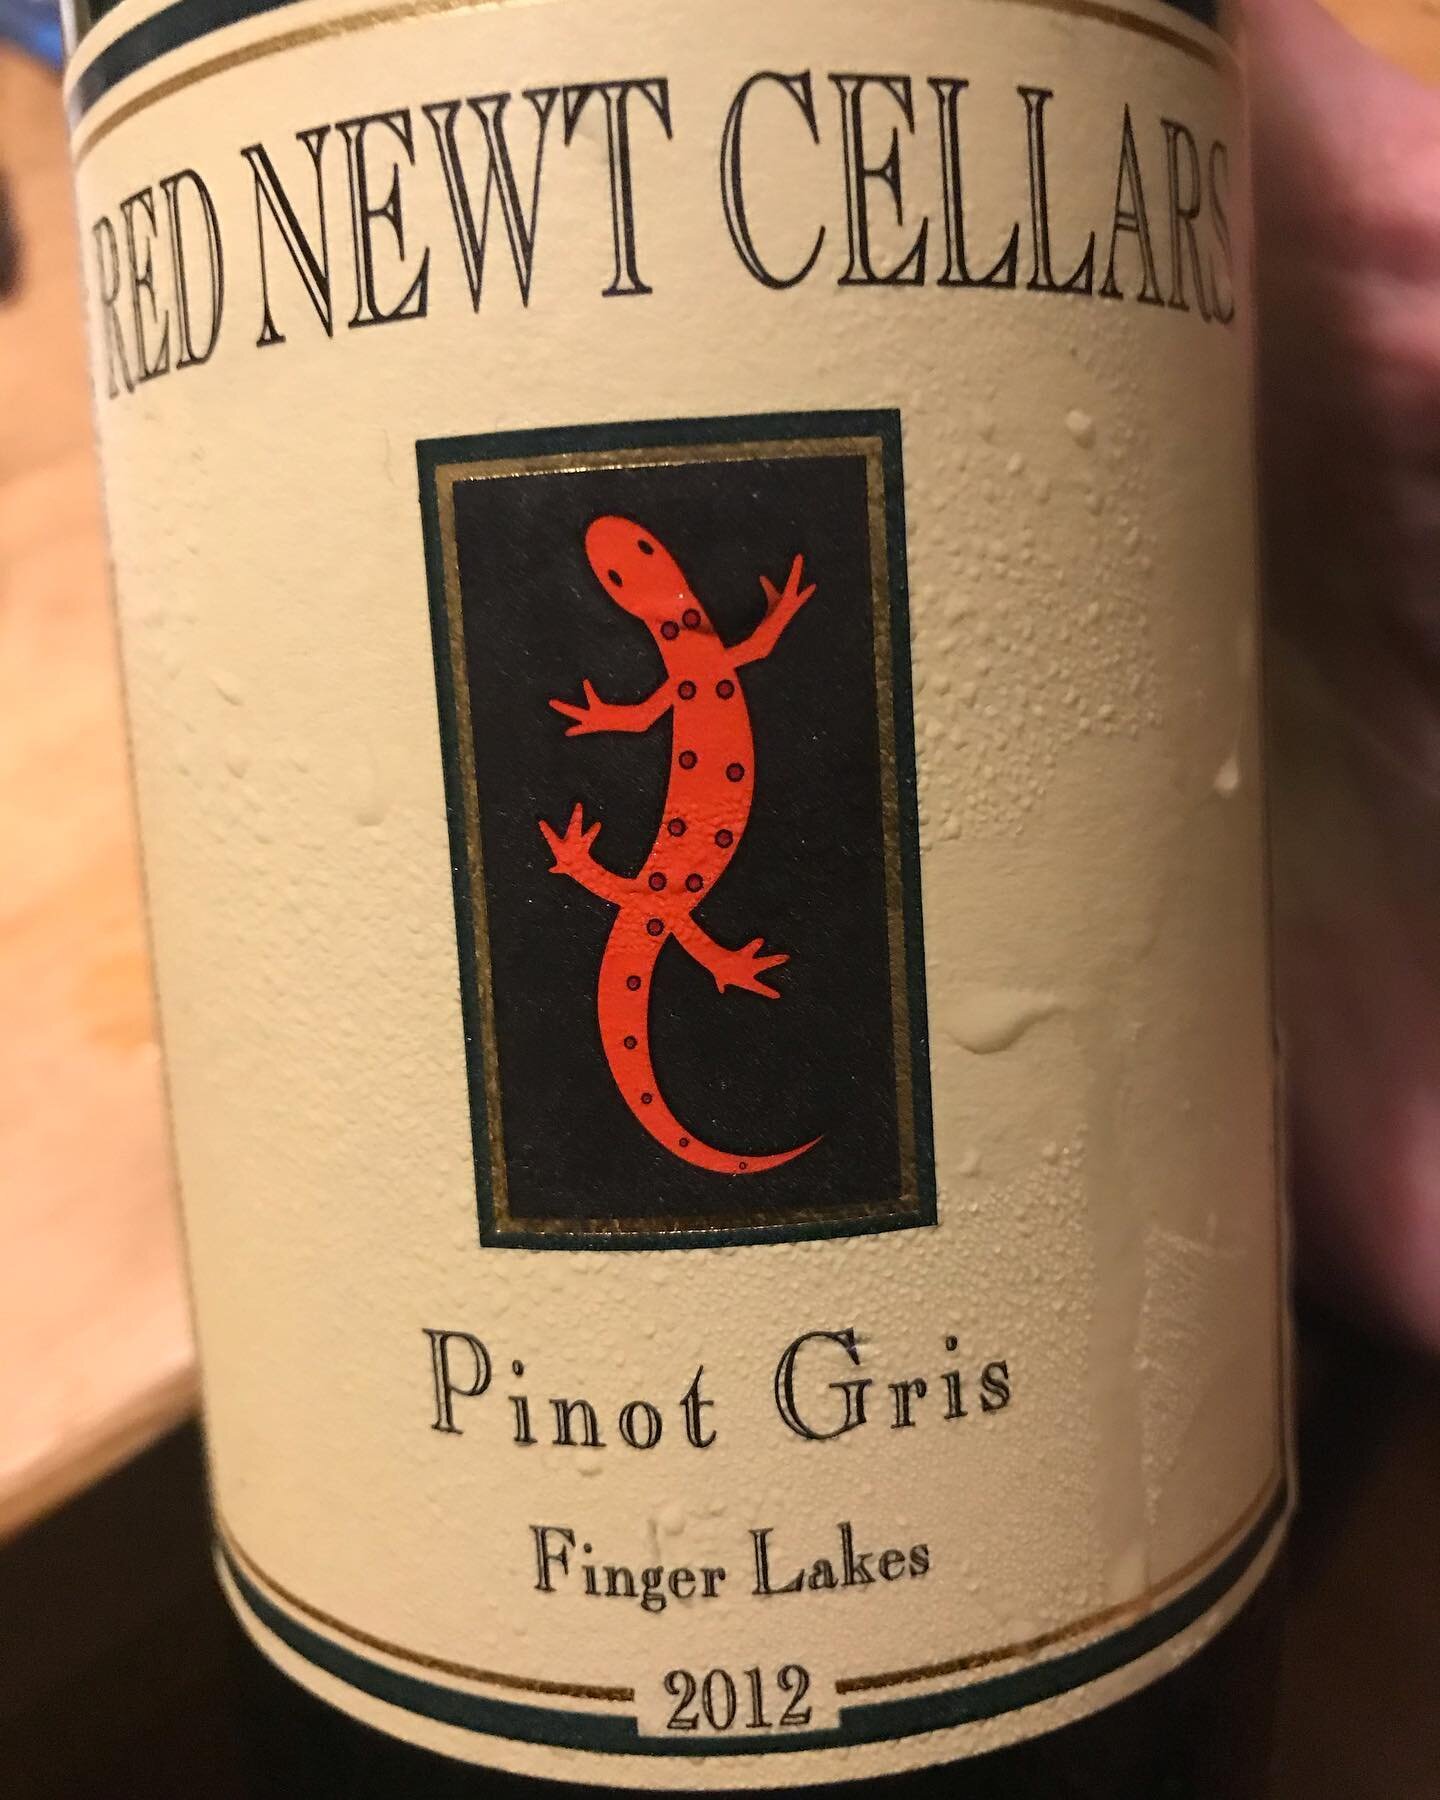 Opened a special bottle tonight to celebrate our five-year wedding anniversary. We got this during a trip to the Finger Lakes, and it did not disappoint. Lovely wine, lovely wife... I&rsquo;m a lucky guy.